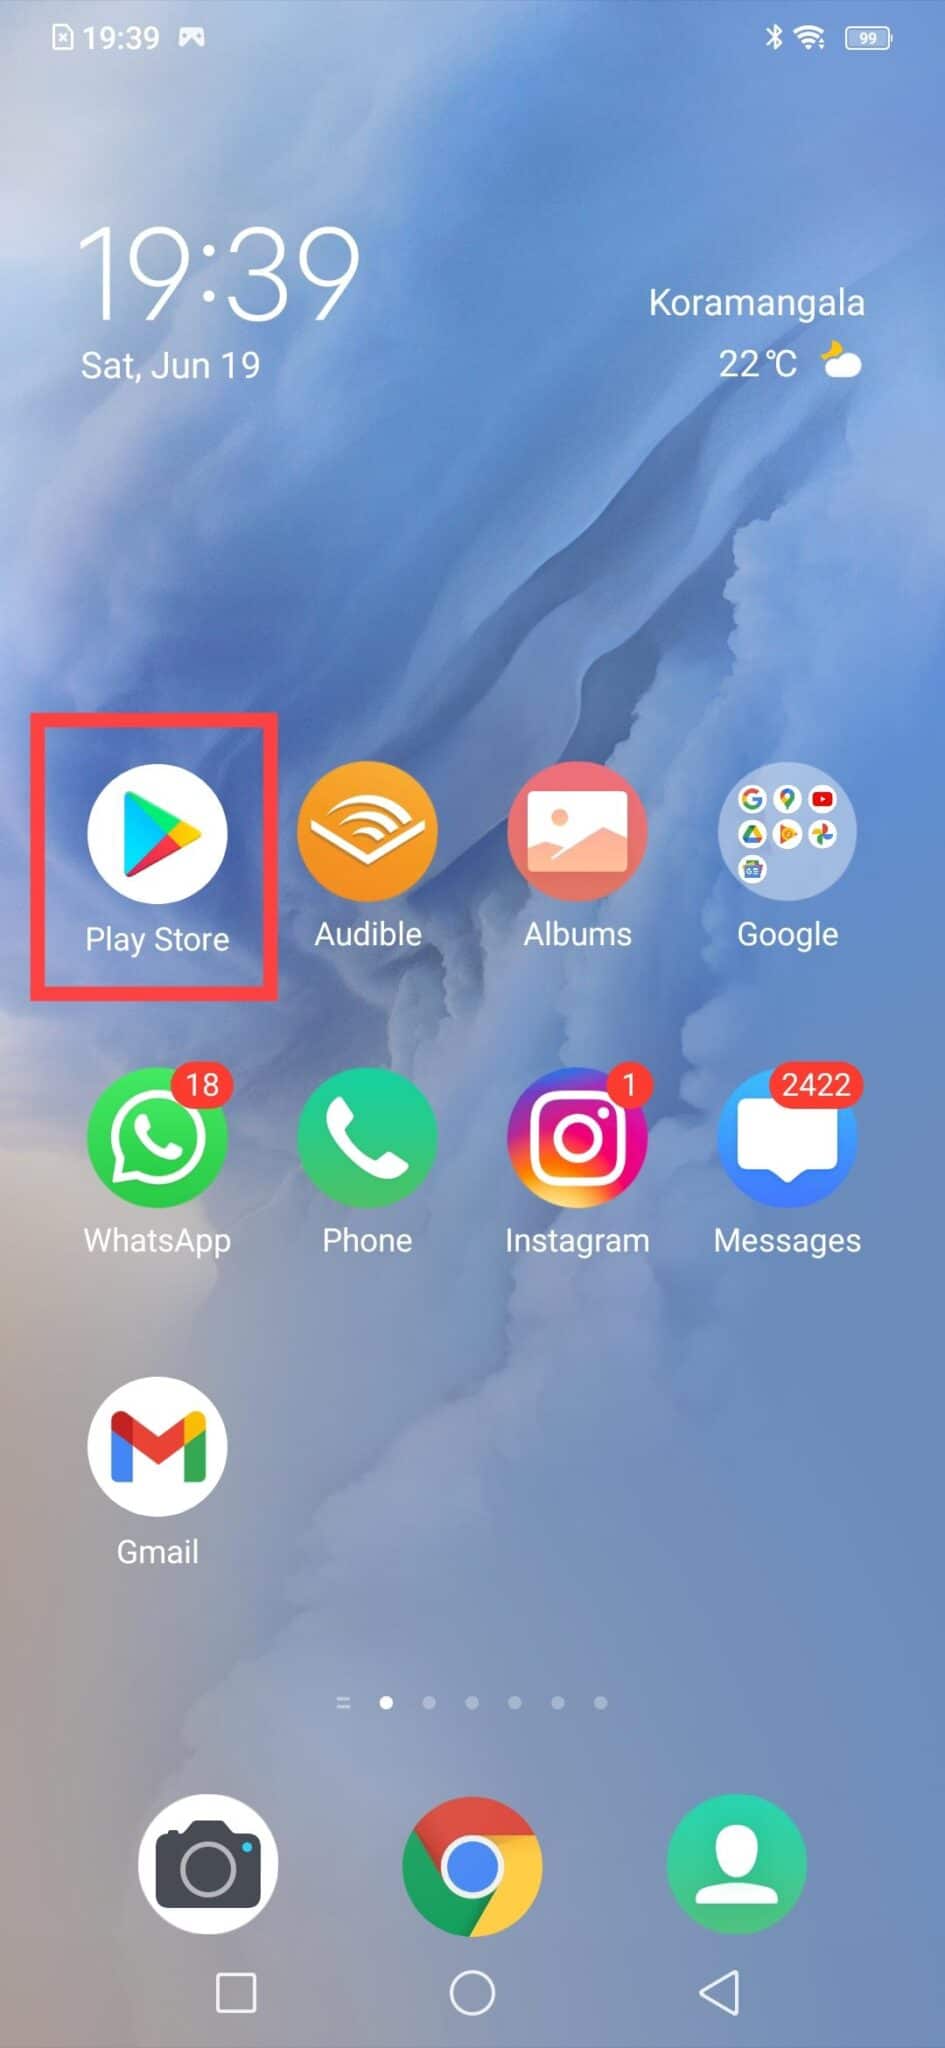 Launch Play Store from the app menu on your phone | Fix YouTube Keeps Signing Me Out